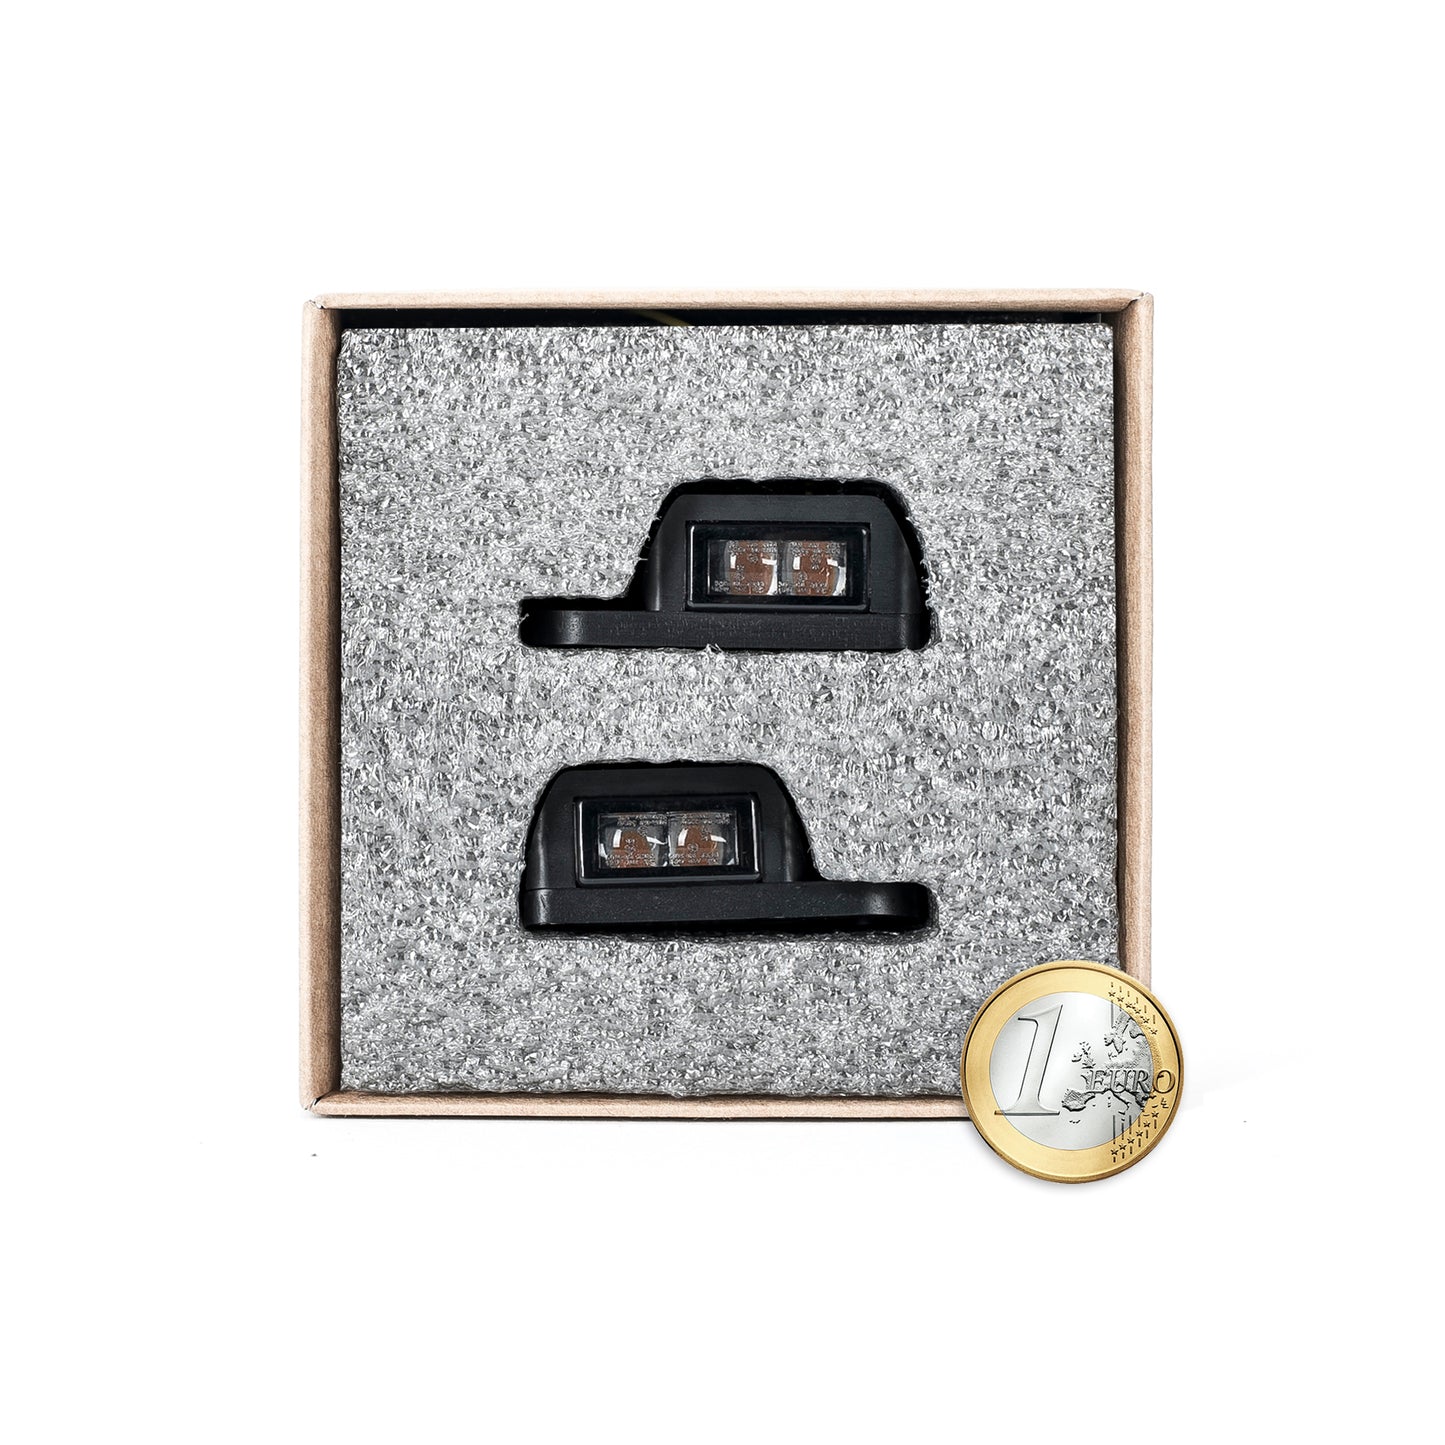 Harley Davidson "Turbo" led turn signals in a package box by Killer Custom white background